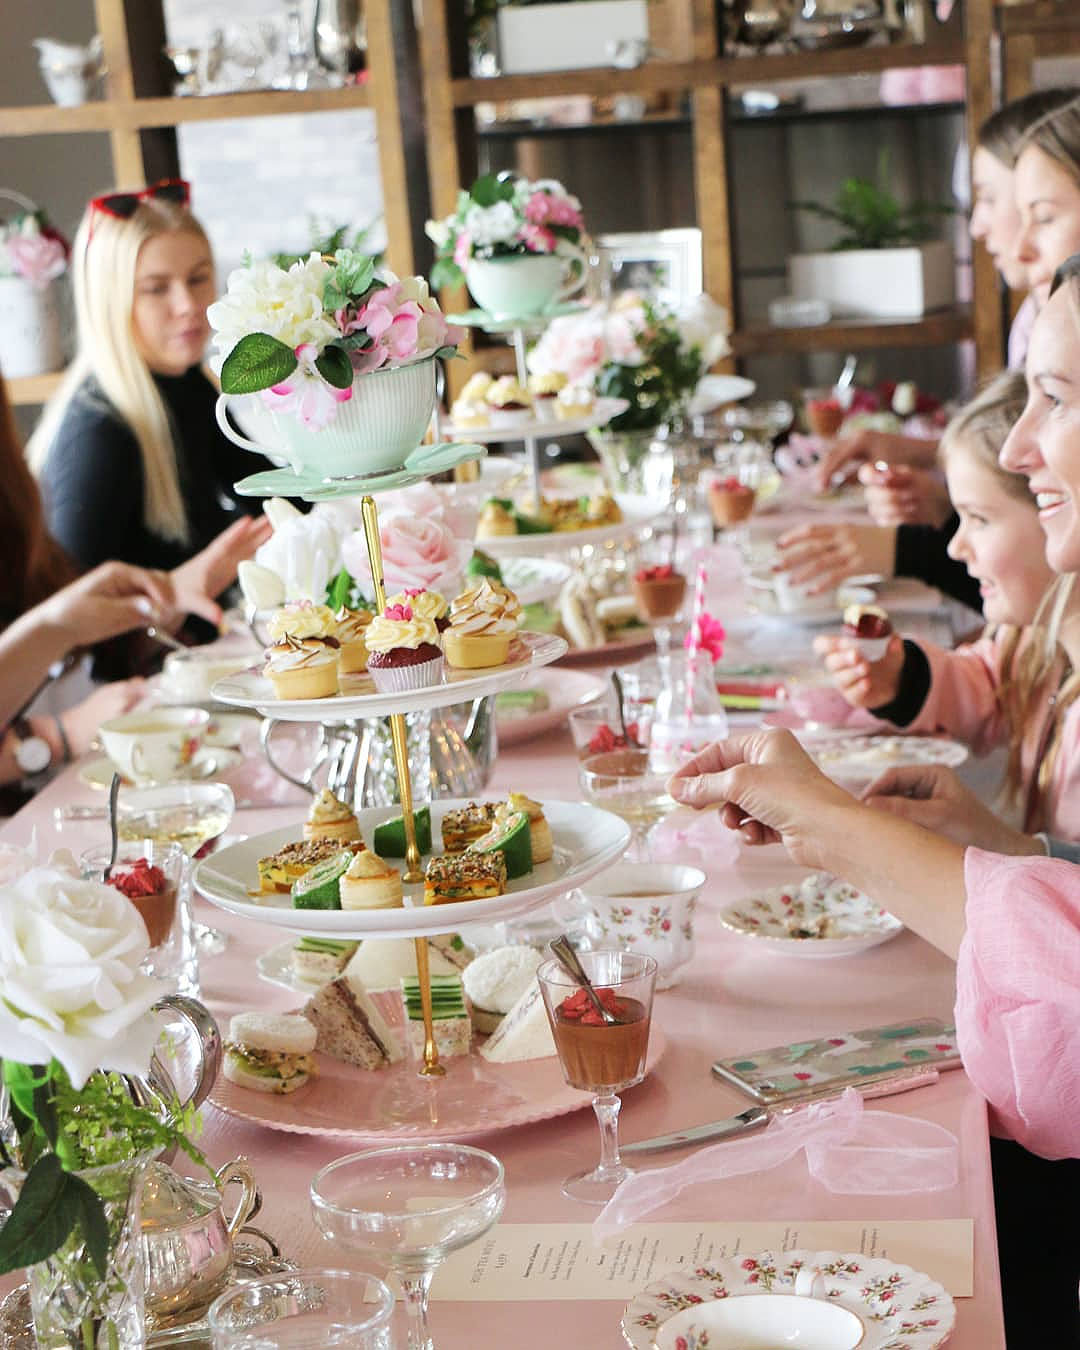 People enjoy a vintage high tea at Moxie, one of the best spots in Auckland for high tea.